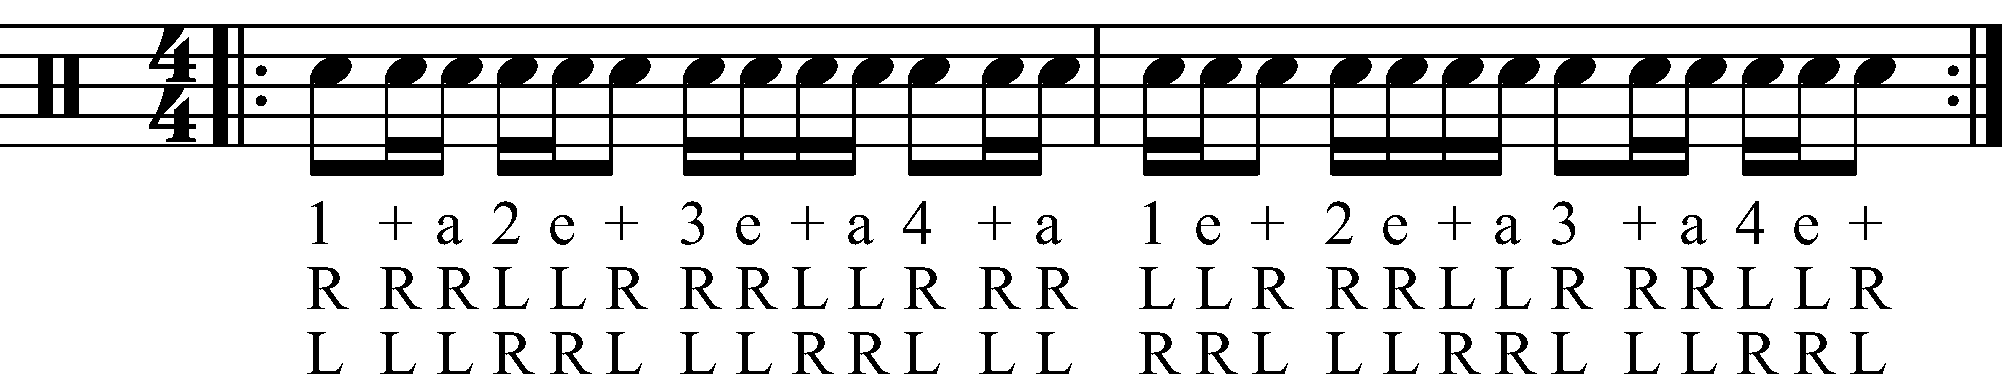 An abbreviated 5 stroke roll in reverse sticking.